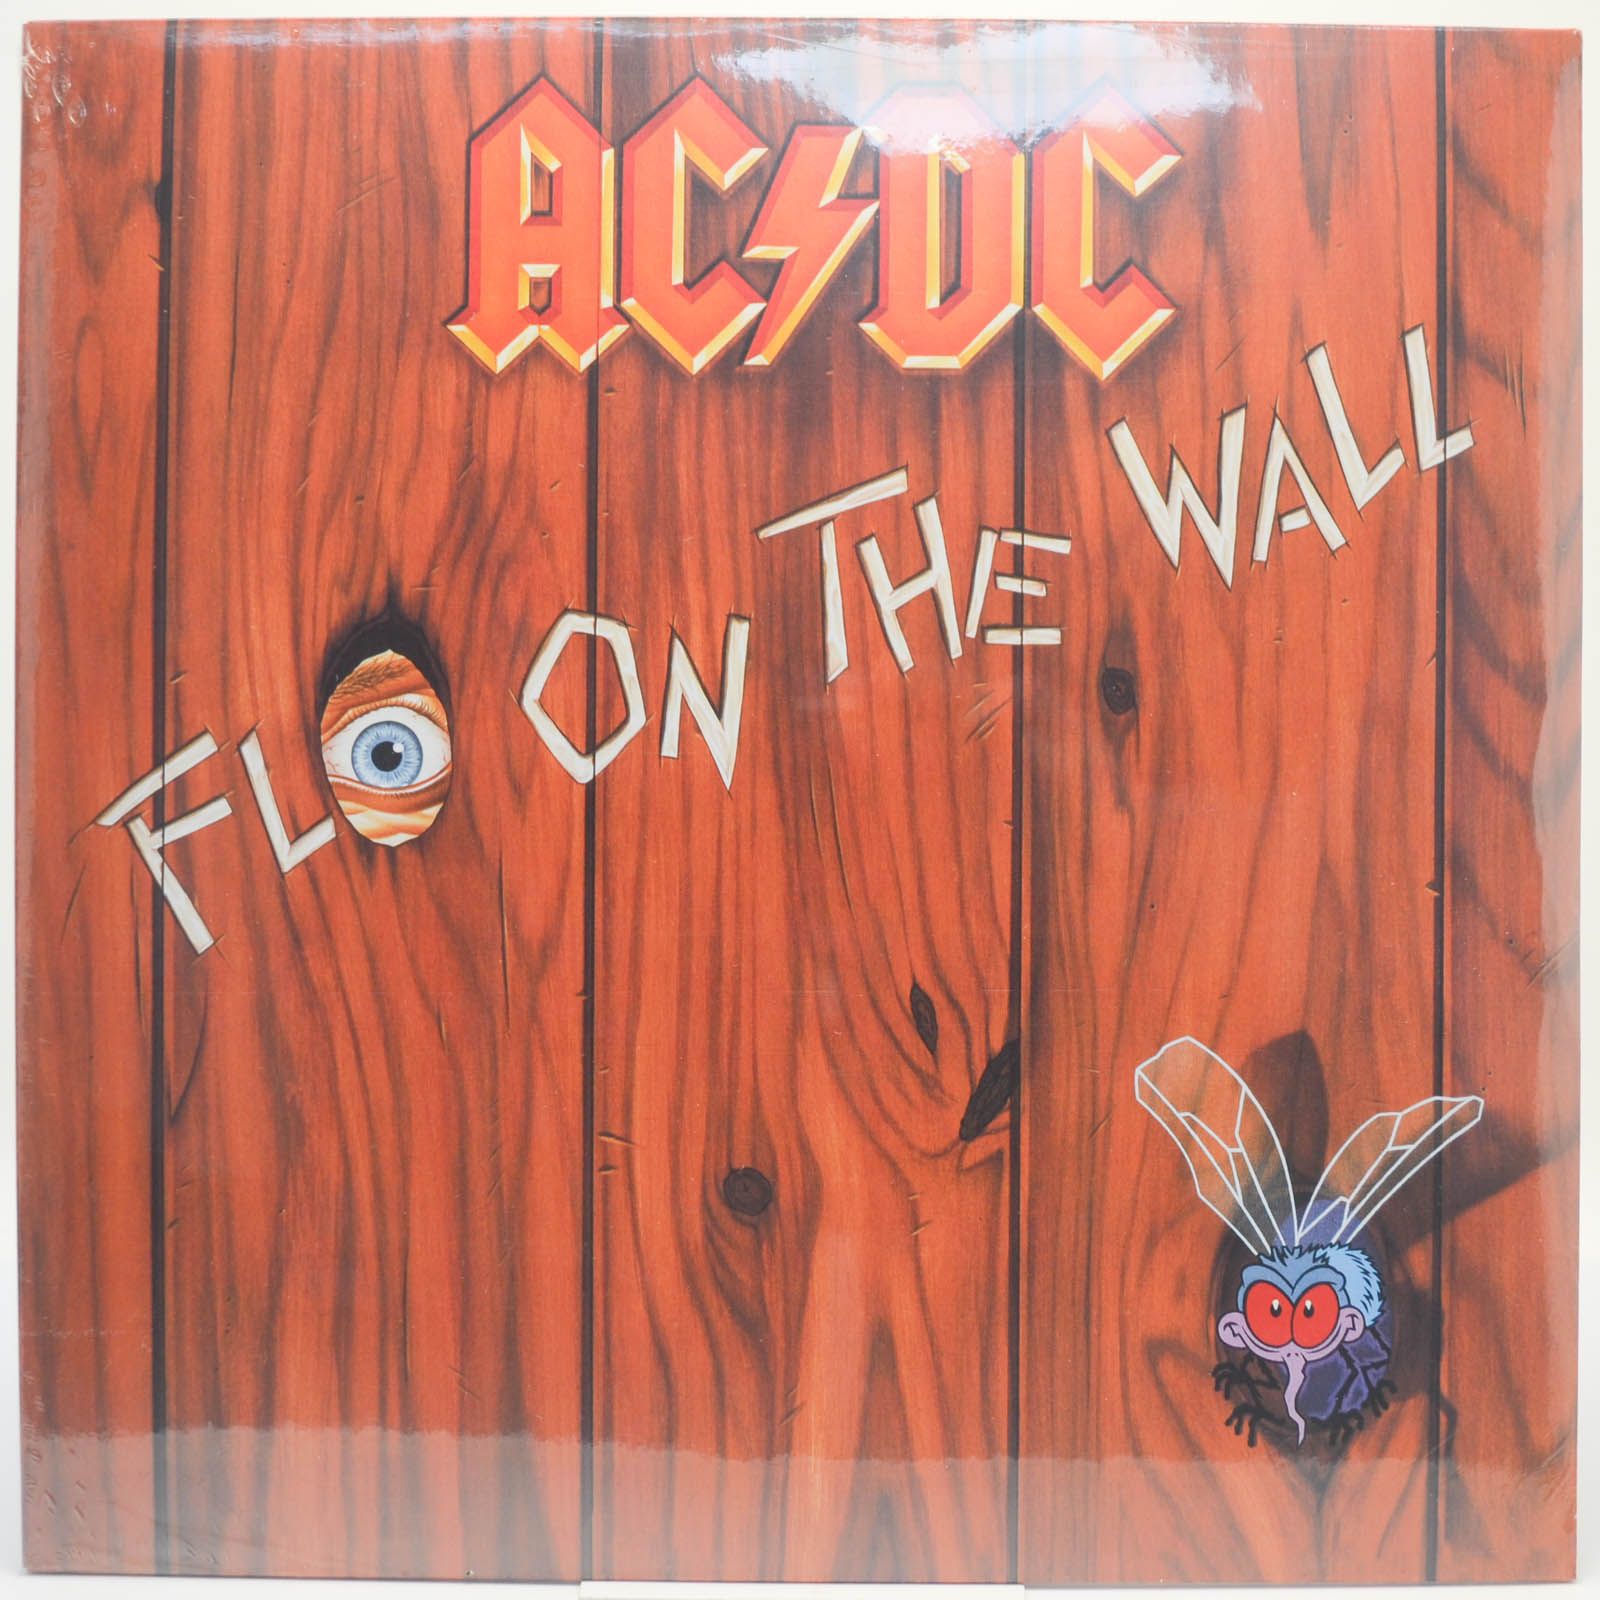 AC/DC — Fly On The Wall, 1985